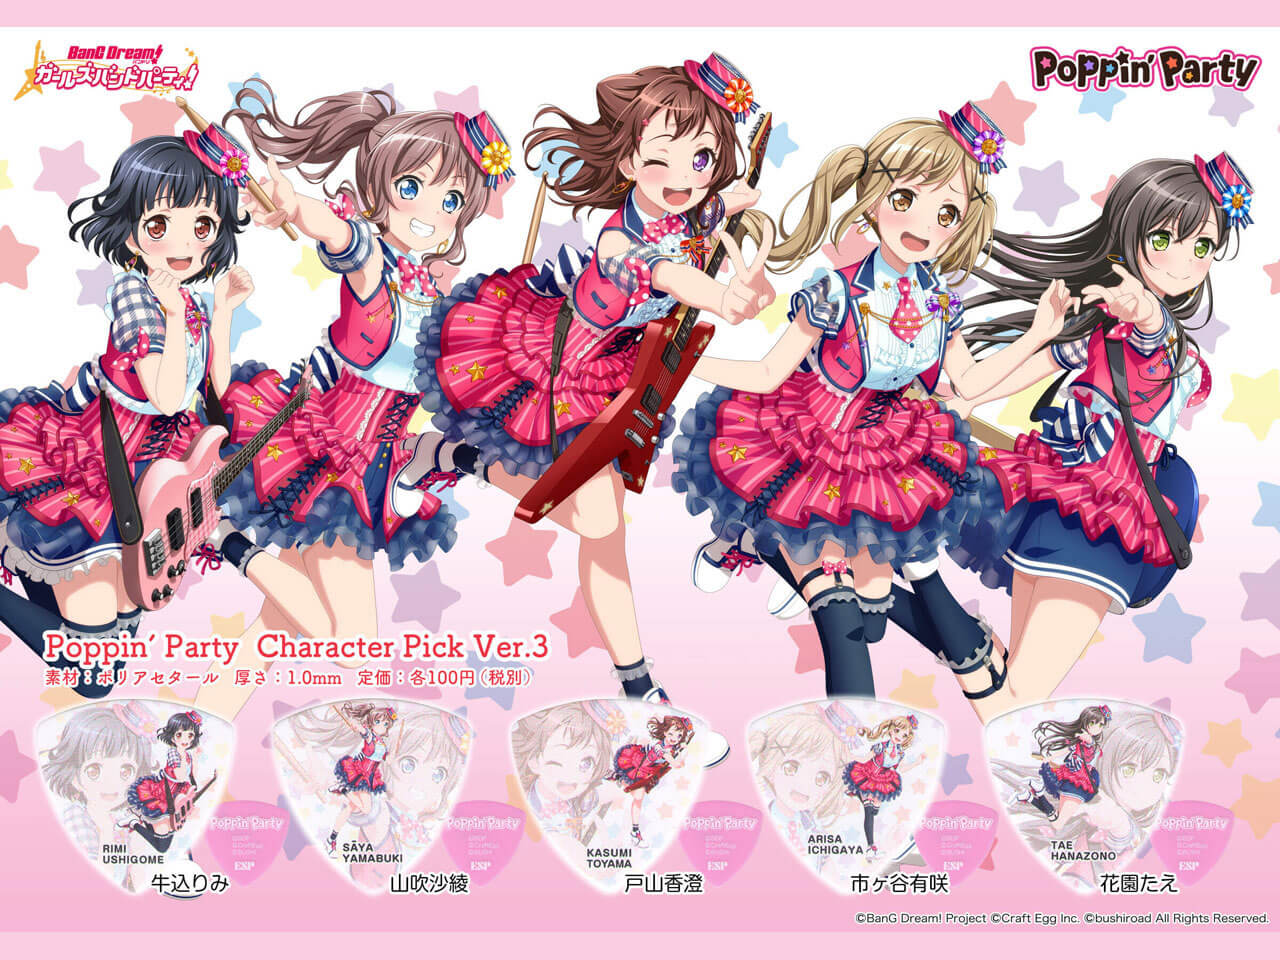 【ESP×BanG Dream!コラボピック】Poppin’Party Character Pick Ver.3 "花園たえ"（GBP Tae Poppin Party 3）＆”ハメパチ” セット